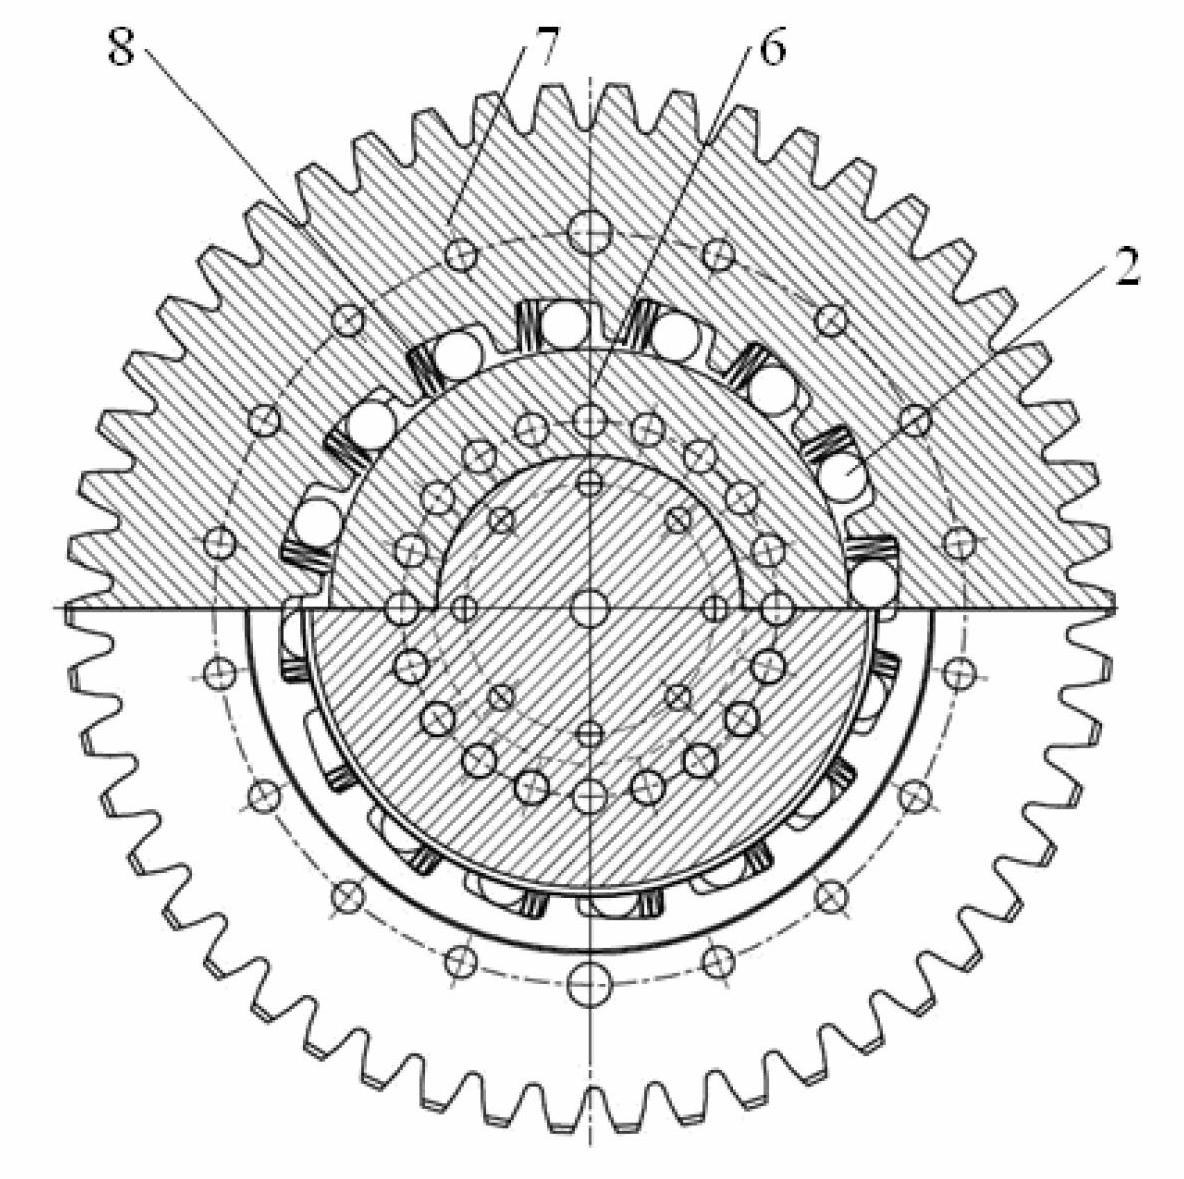 Overrunning clutch for confluence mechanism of double-turbine hydraulic torque converter